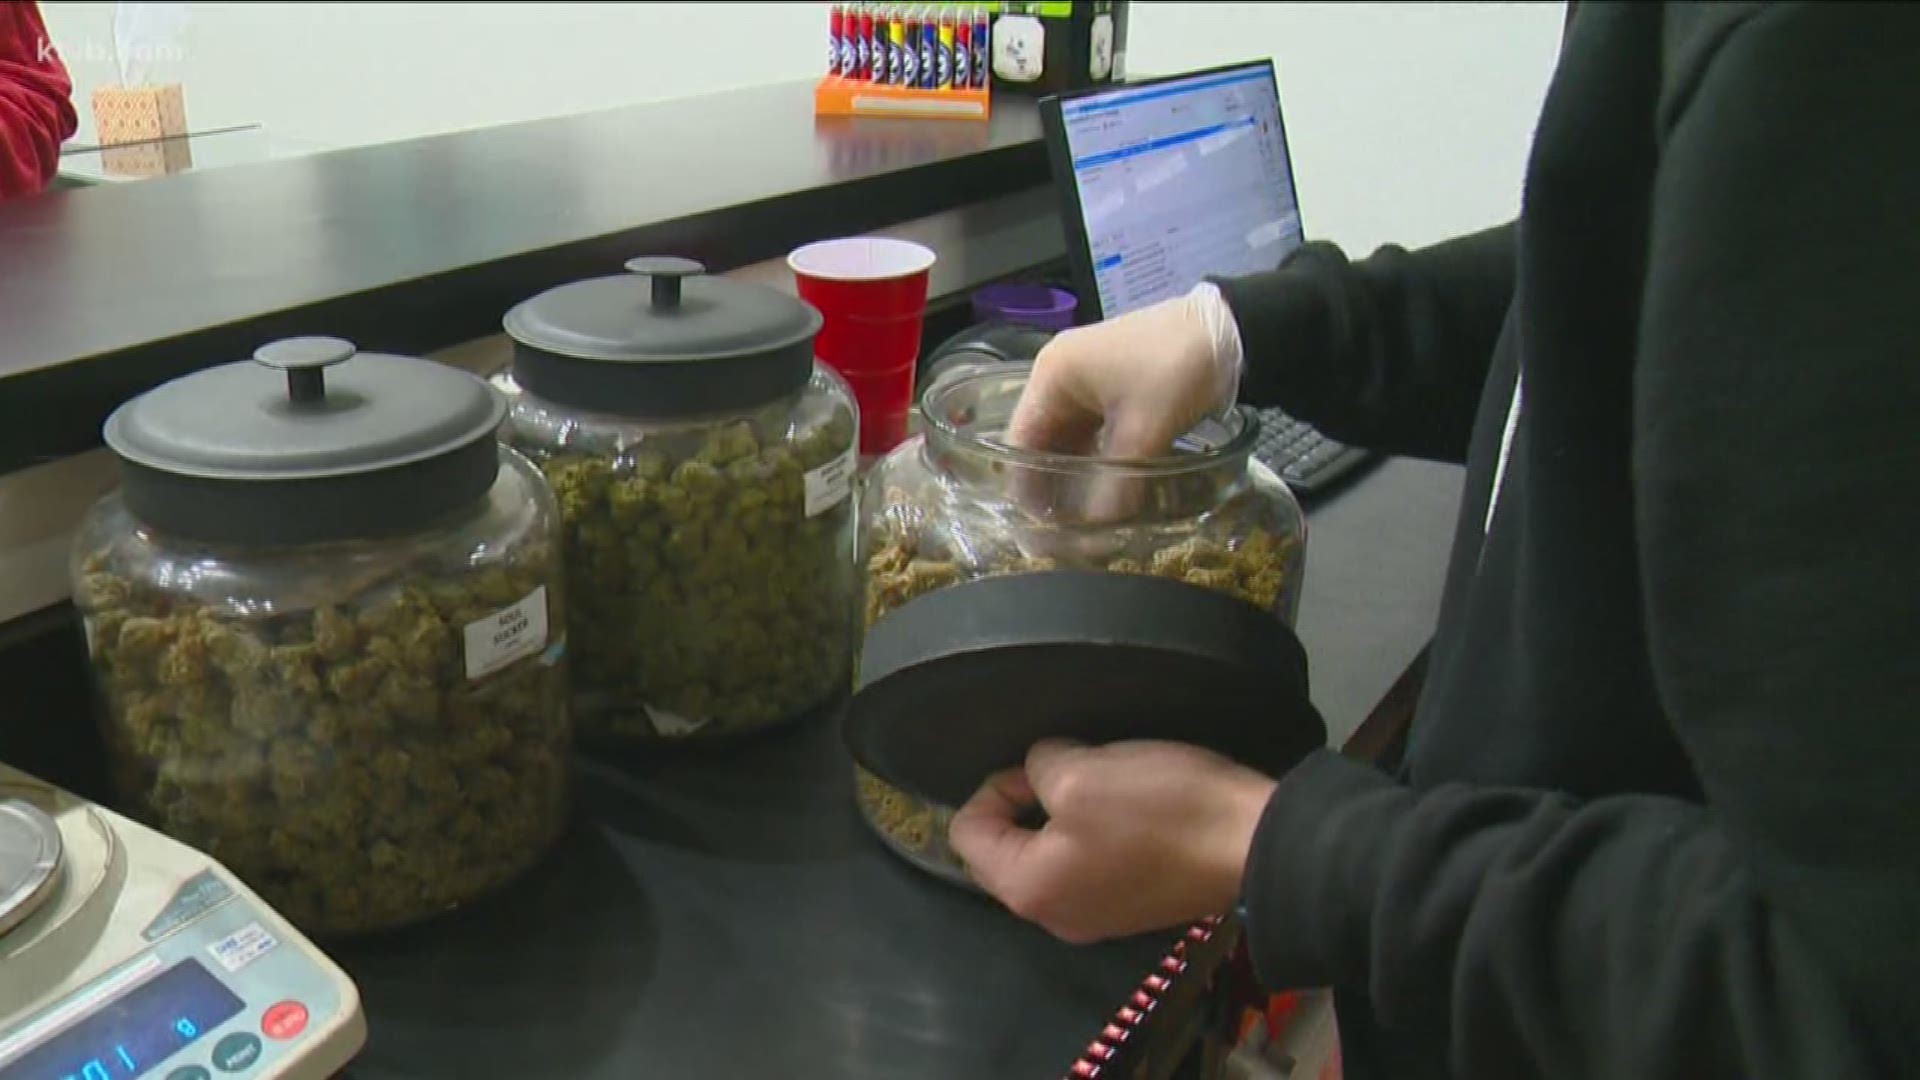 Marijuana is big business in the eastern Oregon town, where taxes on pot sales are projected to bring in more than $1.1 million a year.